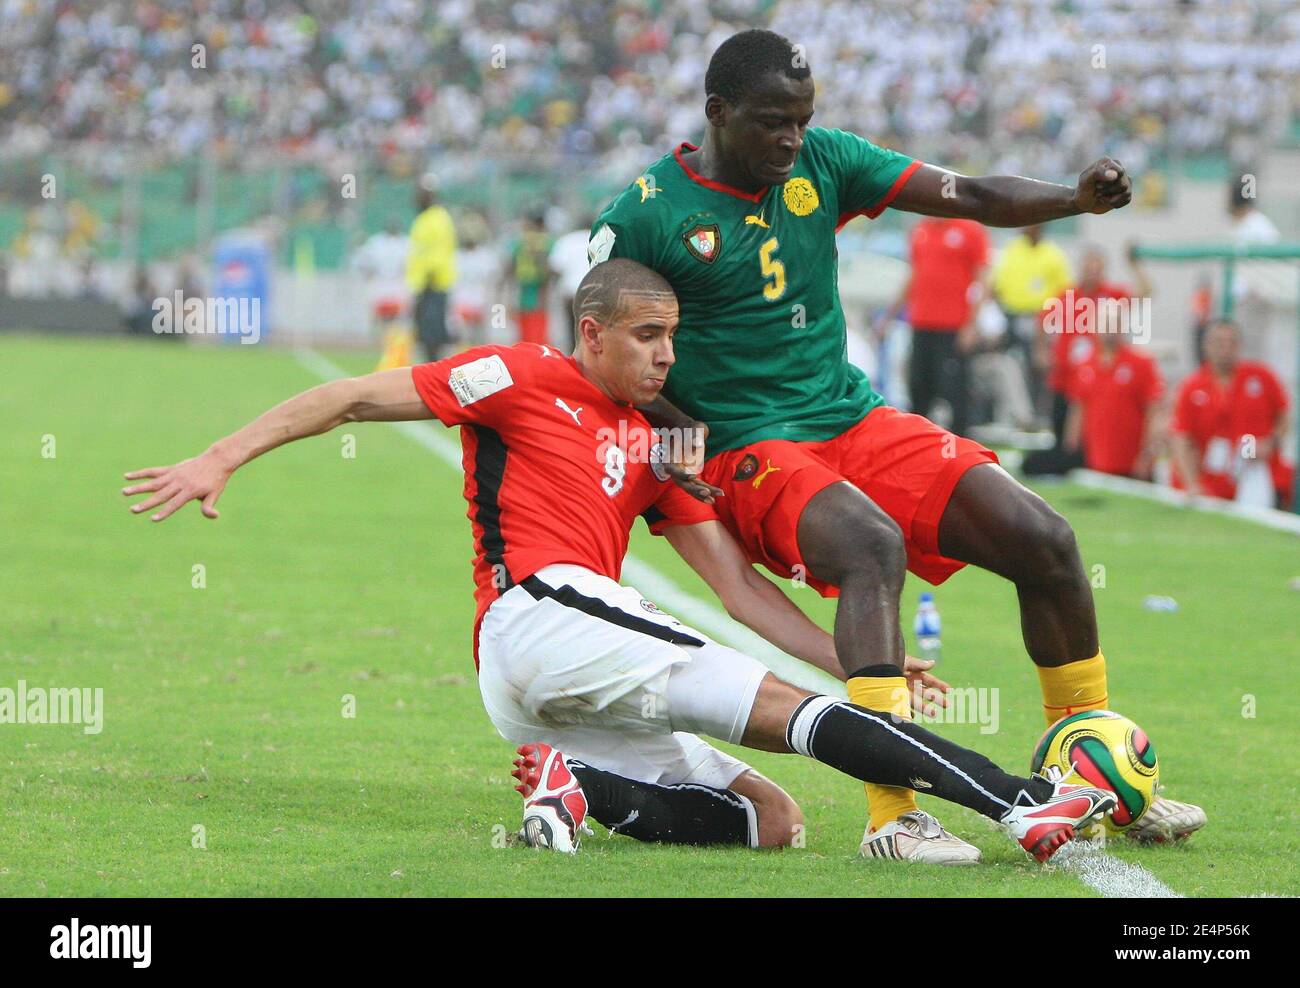 Egypt's Zidan Abdalla Mohamed tackles Cameroon's Thimothee Atouba during the African Cup of Nations soccer match, Cameroon vs Egypt, in Kumasi, Ghana on January 22, 2008. Egypt defeated Cameroon 4-1. Photo by Steeve McMay/Cameleon/ABACAPRESS.COM Stock Photo